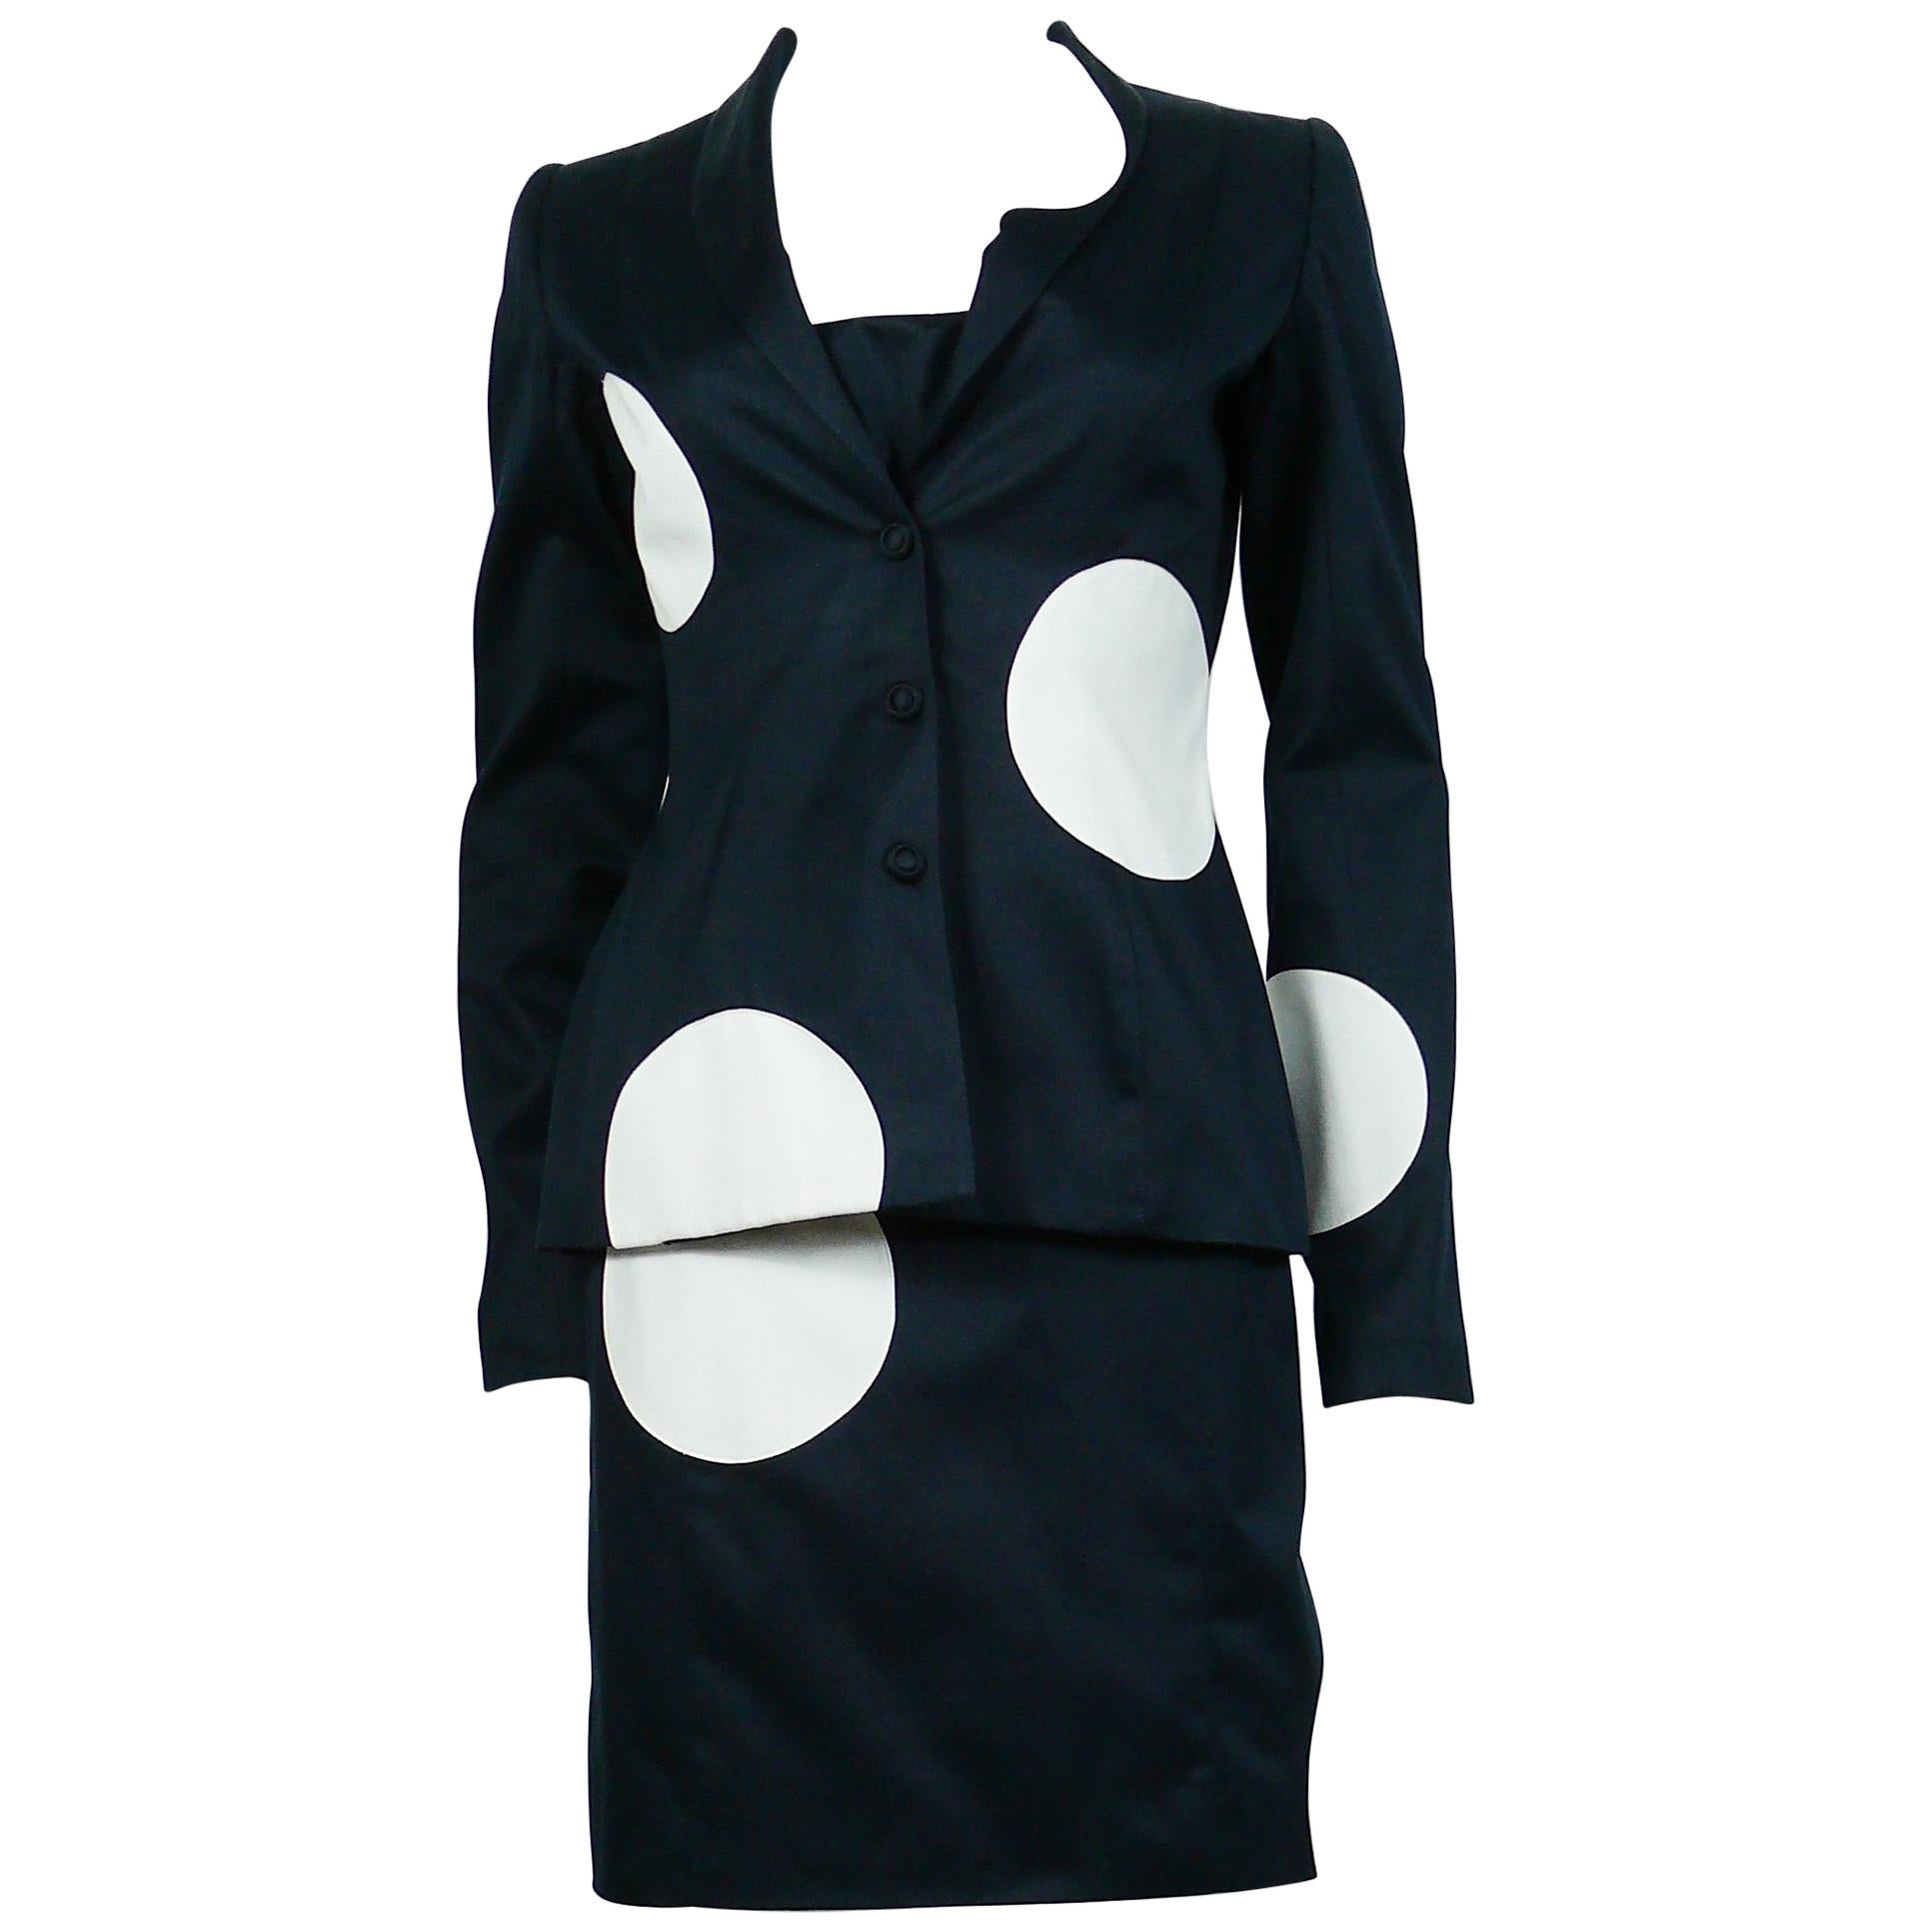 Thierry Mugler Vintage Polka Dot Bustier Dress and Blazer Suit